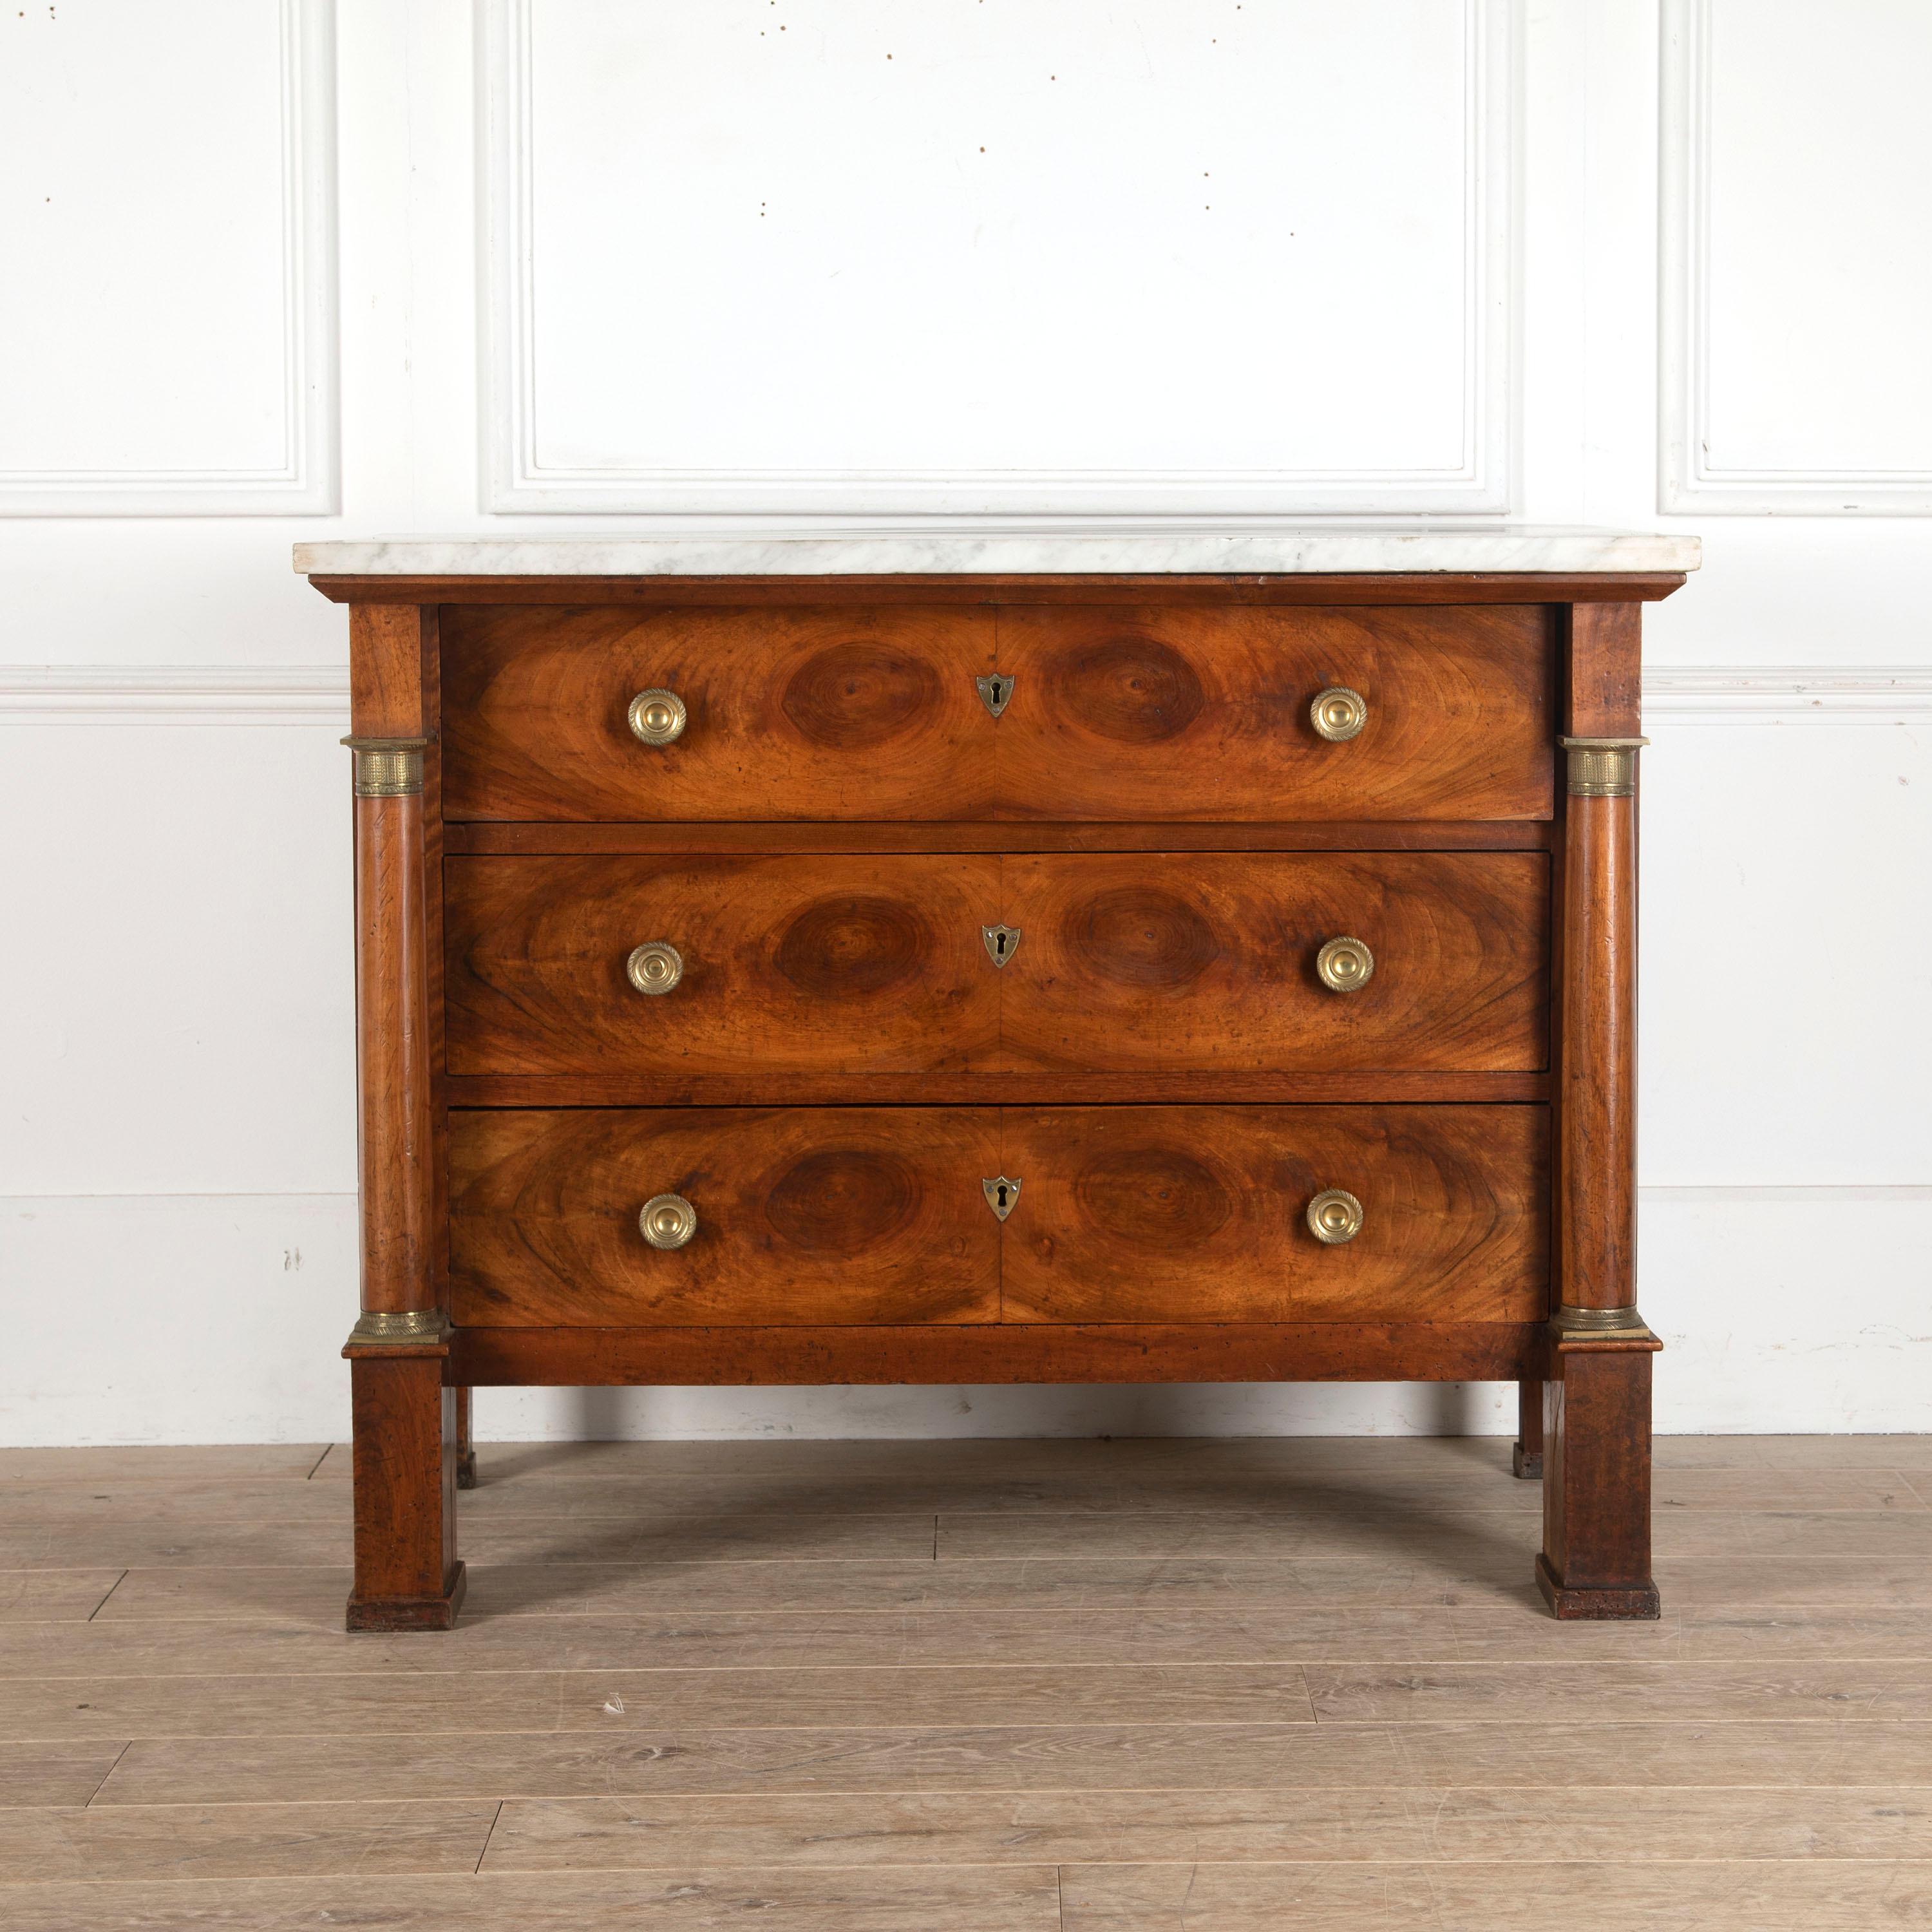 19th century French walnut commode with its original marble top.

This delightful commode embodies the neoclassical style of the Empire. The rectangular body with three drawers is framed by pilasters. 

The three drawers feature beautifully